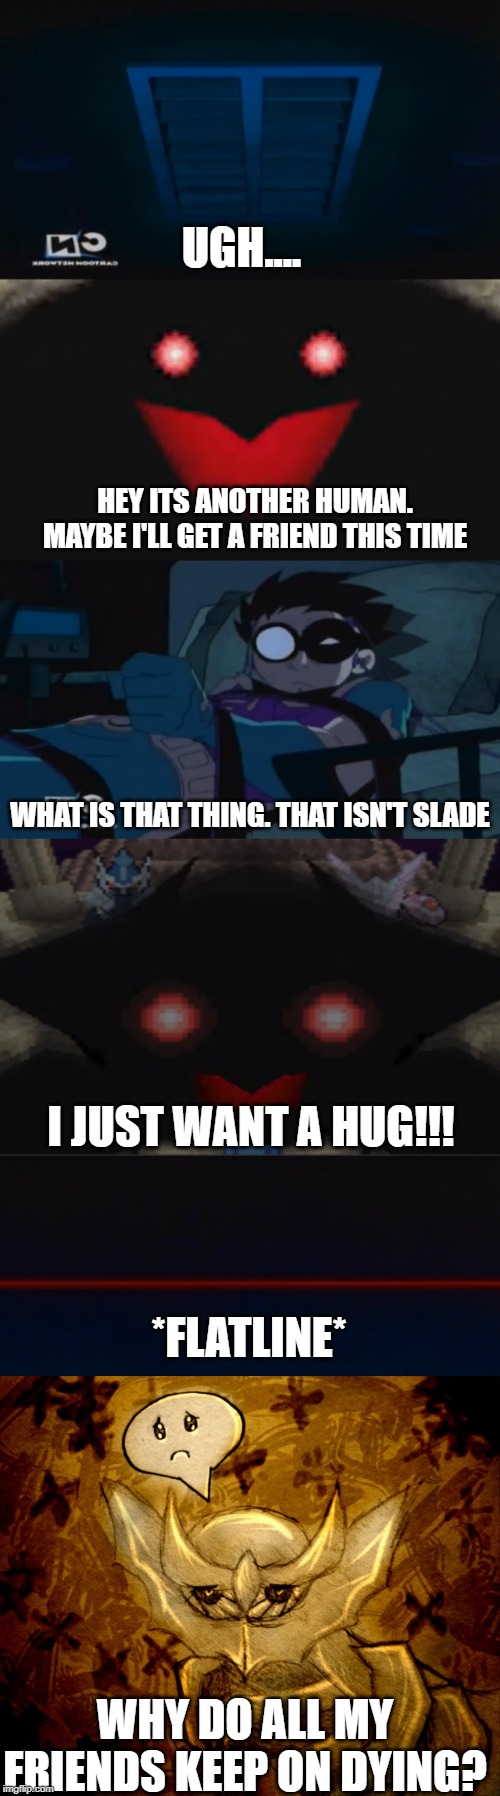 "Haunted" by Giratina, who just wanted a friend | UGH.... HEY ITS ANOTHER HUMAN. MAYBE I'LL GET A FRIEND THIS TIME; WHAT IS THAT THING. THAT ISN'T SLADE; I JUST WANT A HUG!!! *FLATLINE*; WHY DO ALL MY FRIENDS KEEP ON DYING? | image tagged in giratina,teen titans,robin,pokemon,i just wanted to be your friend,pokemon platinum | made w/ Imgflip meme maker